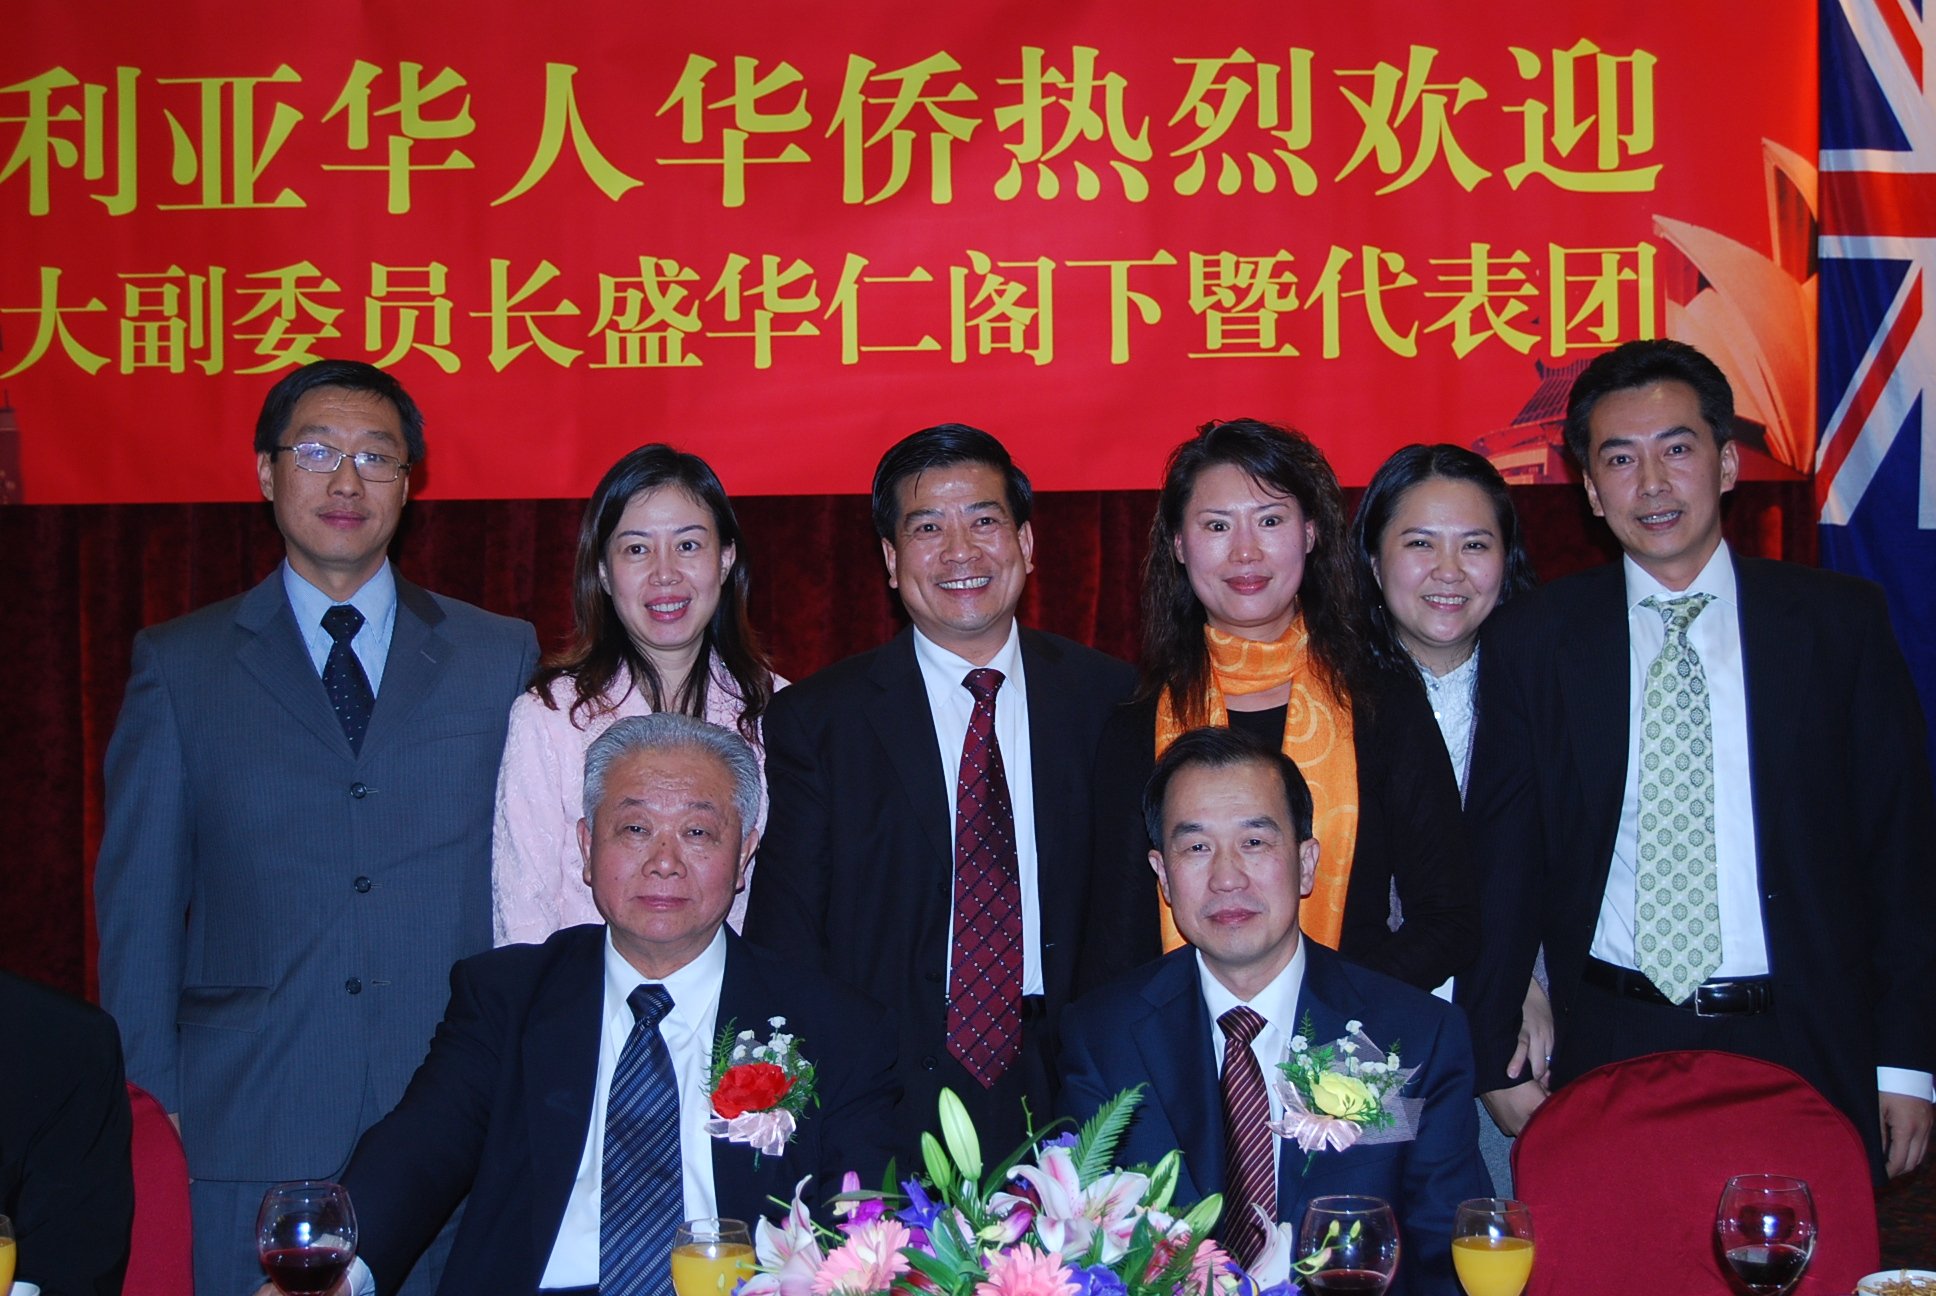 Chinese Government officials visit to Sydney